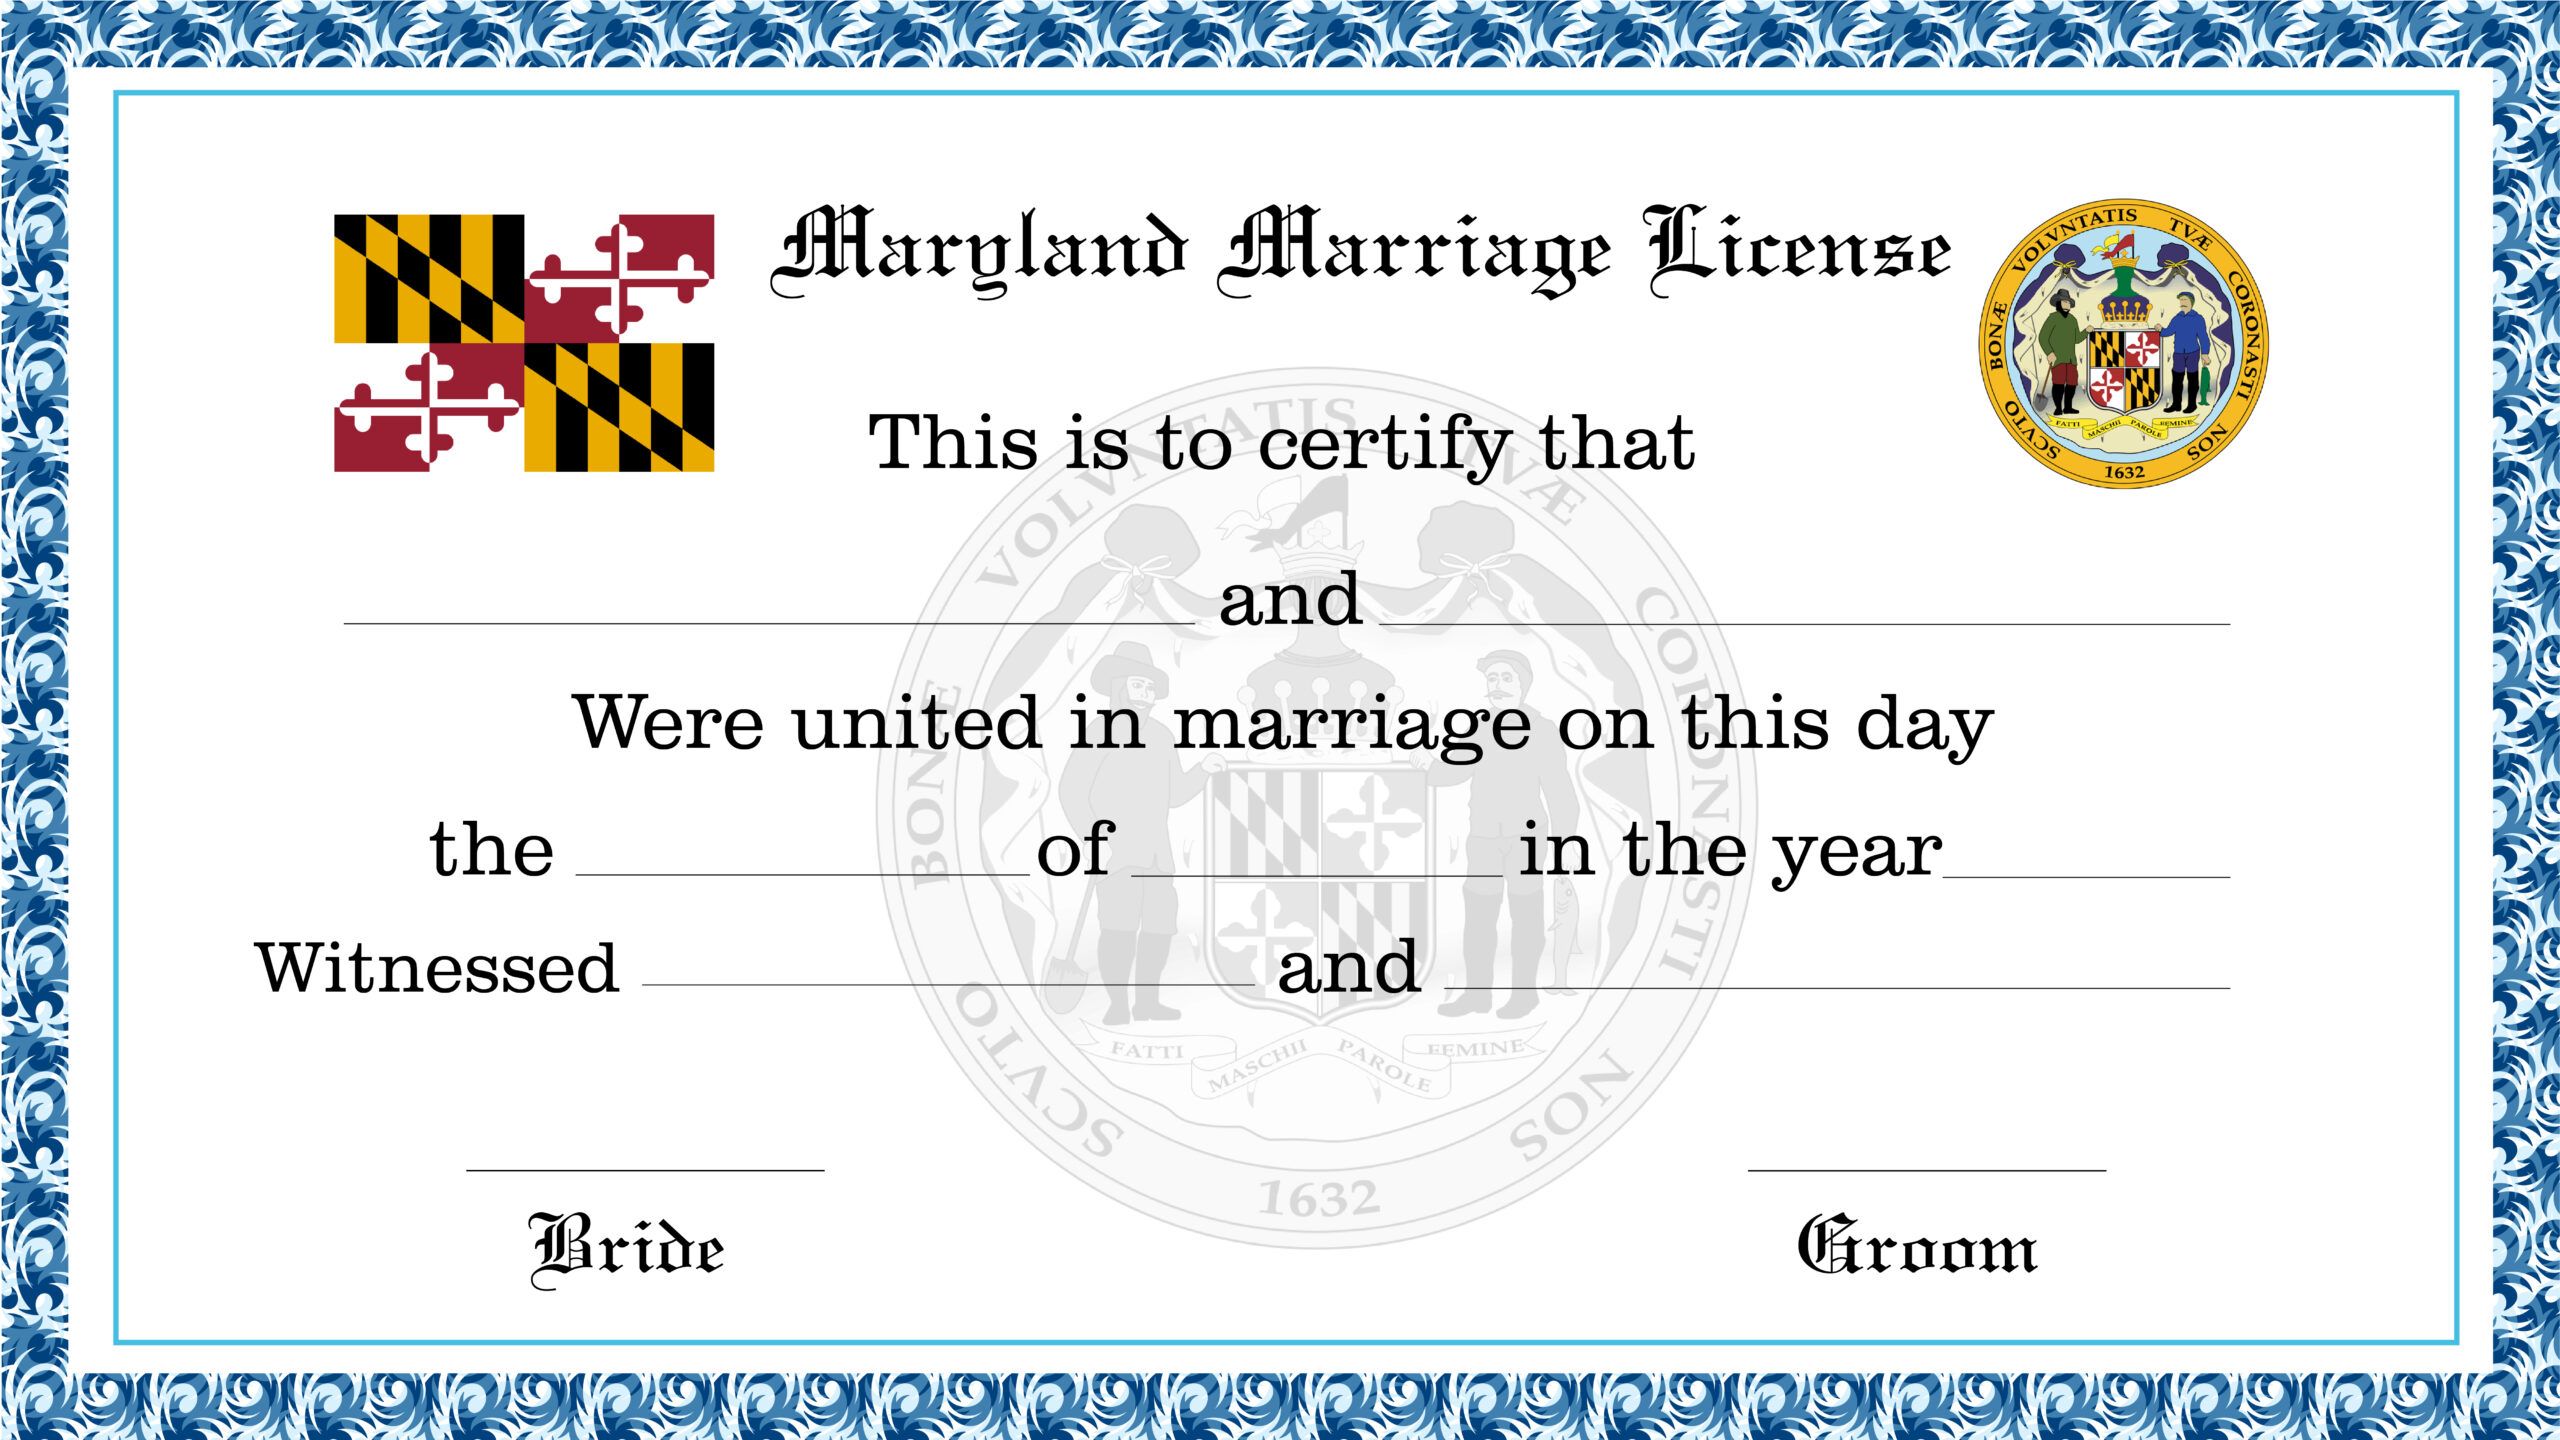 Maryland Marriage License License Lookup